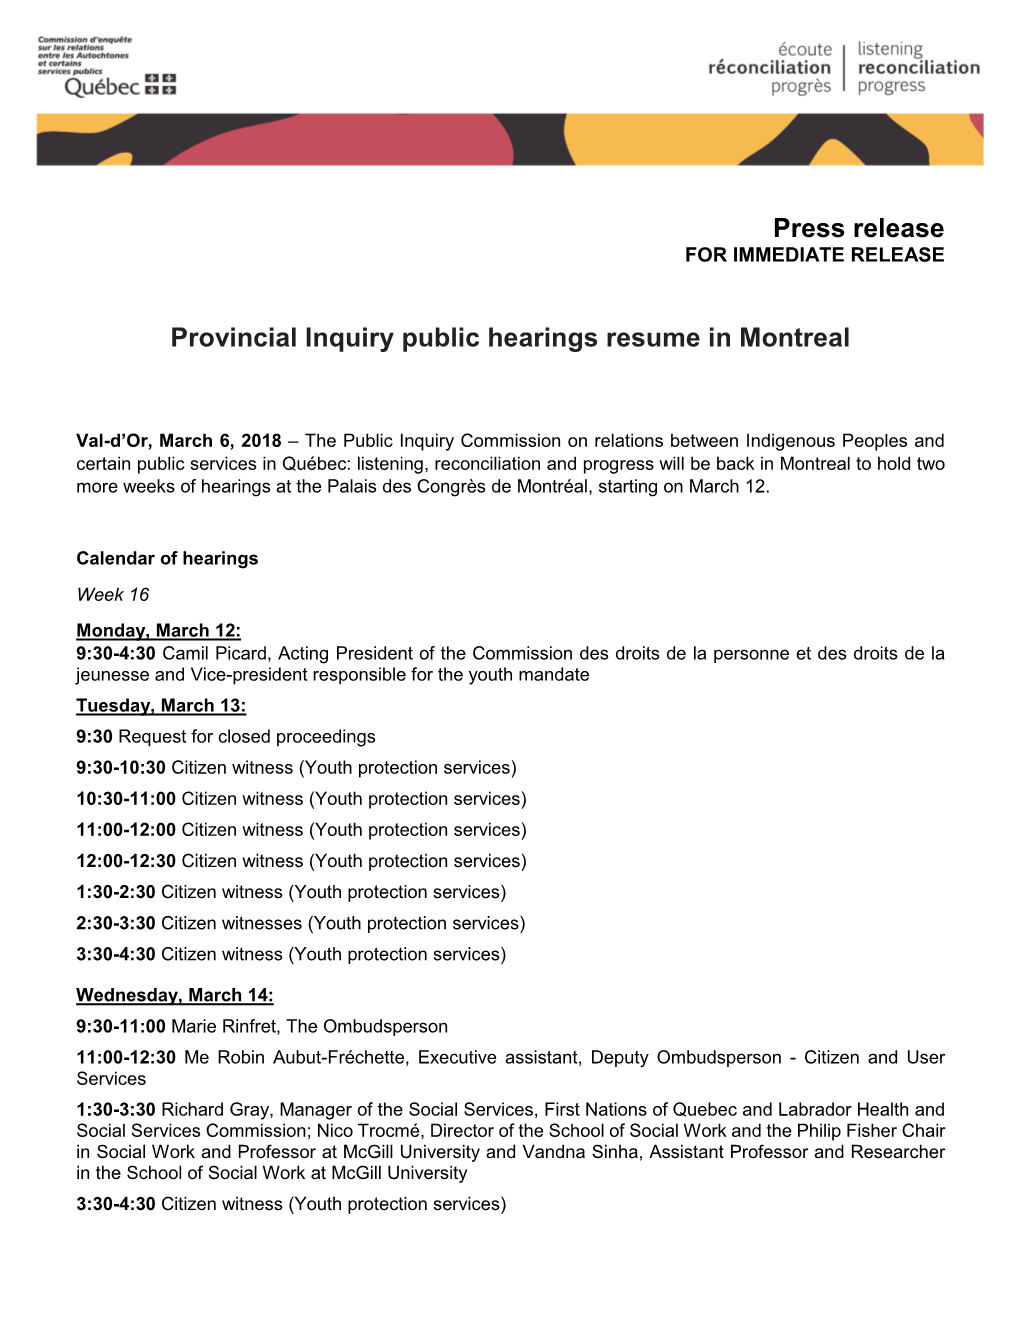 Press Release Provincial Inquiry Public Hearings Resume in Montreal